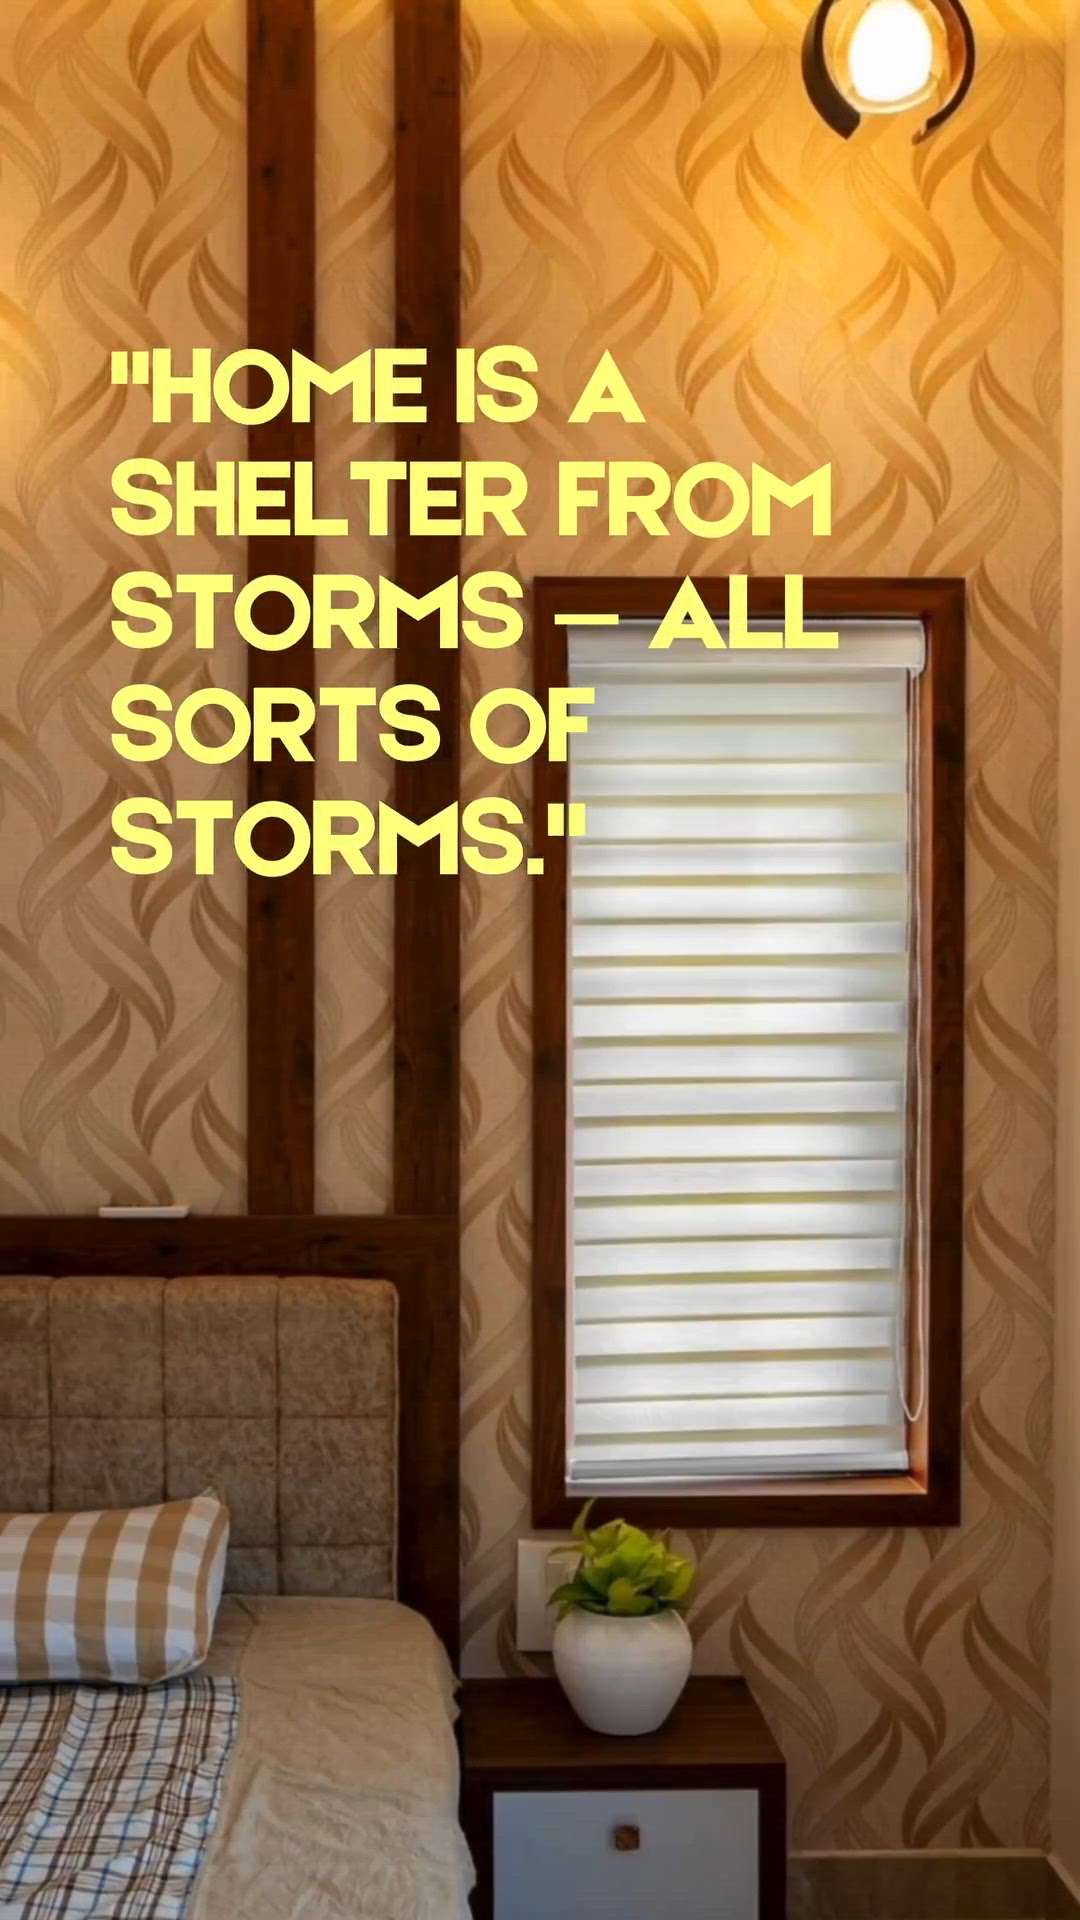 Home is a shelter from Storms....
.
.
.
#instagramgrowth #explore
#igreach #instagramhacks
#interiordesign #homedecor #interiorinspiration
#designinspiration #interiorstyling #homeinterior
#decorating #interiordecor #homedesign